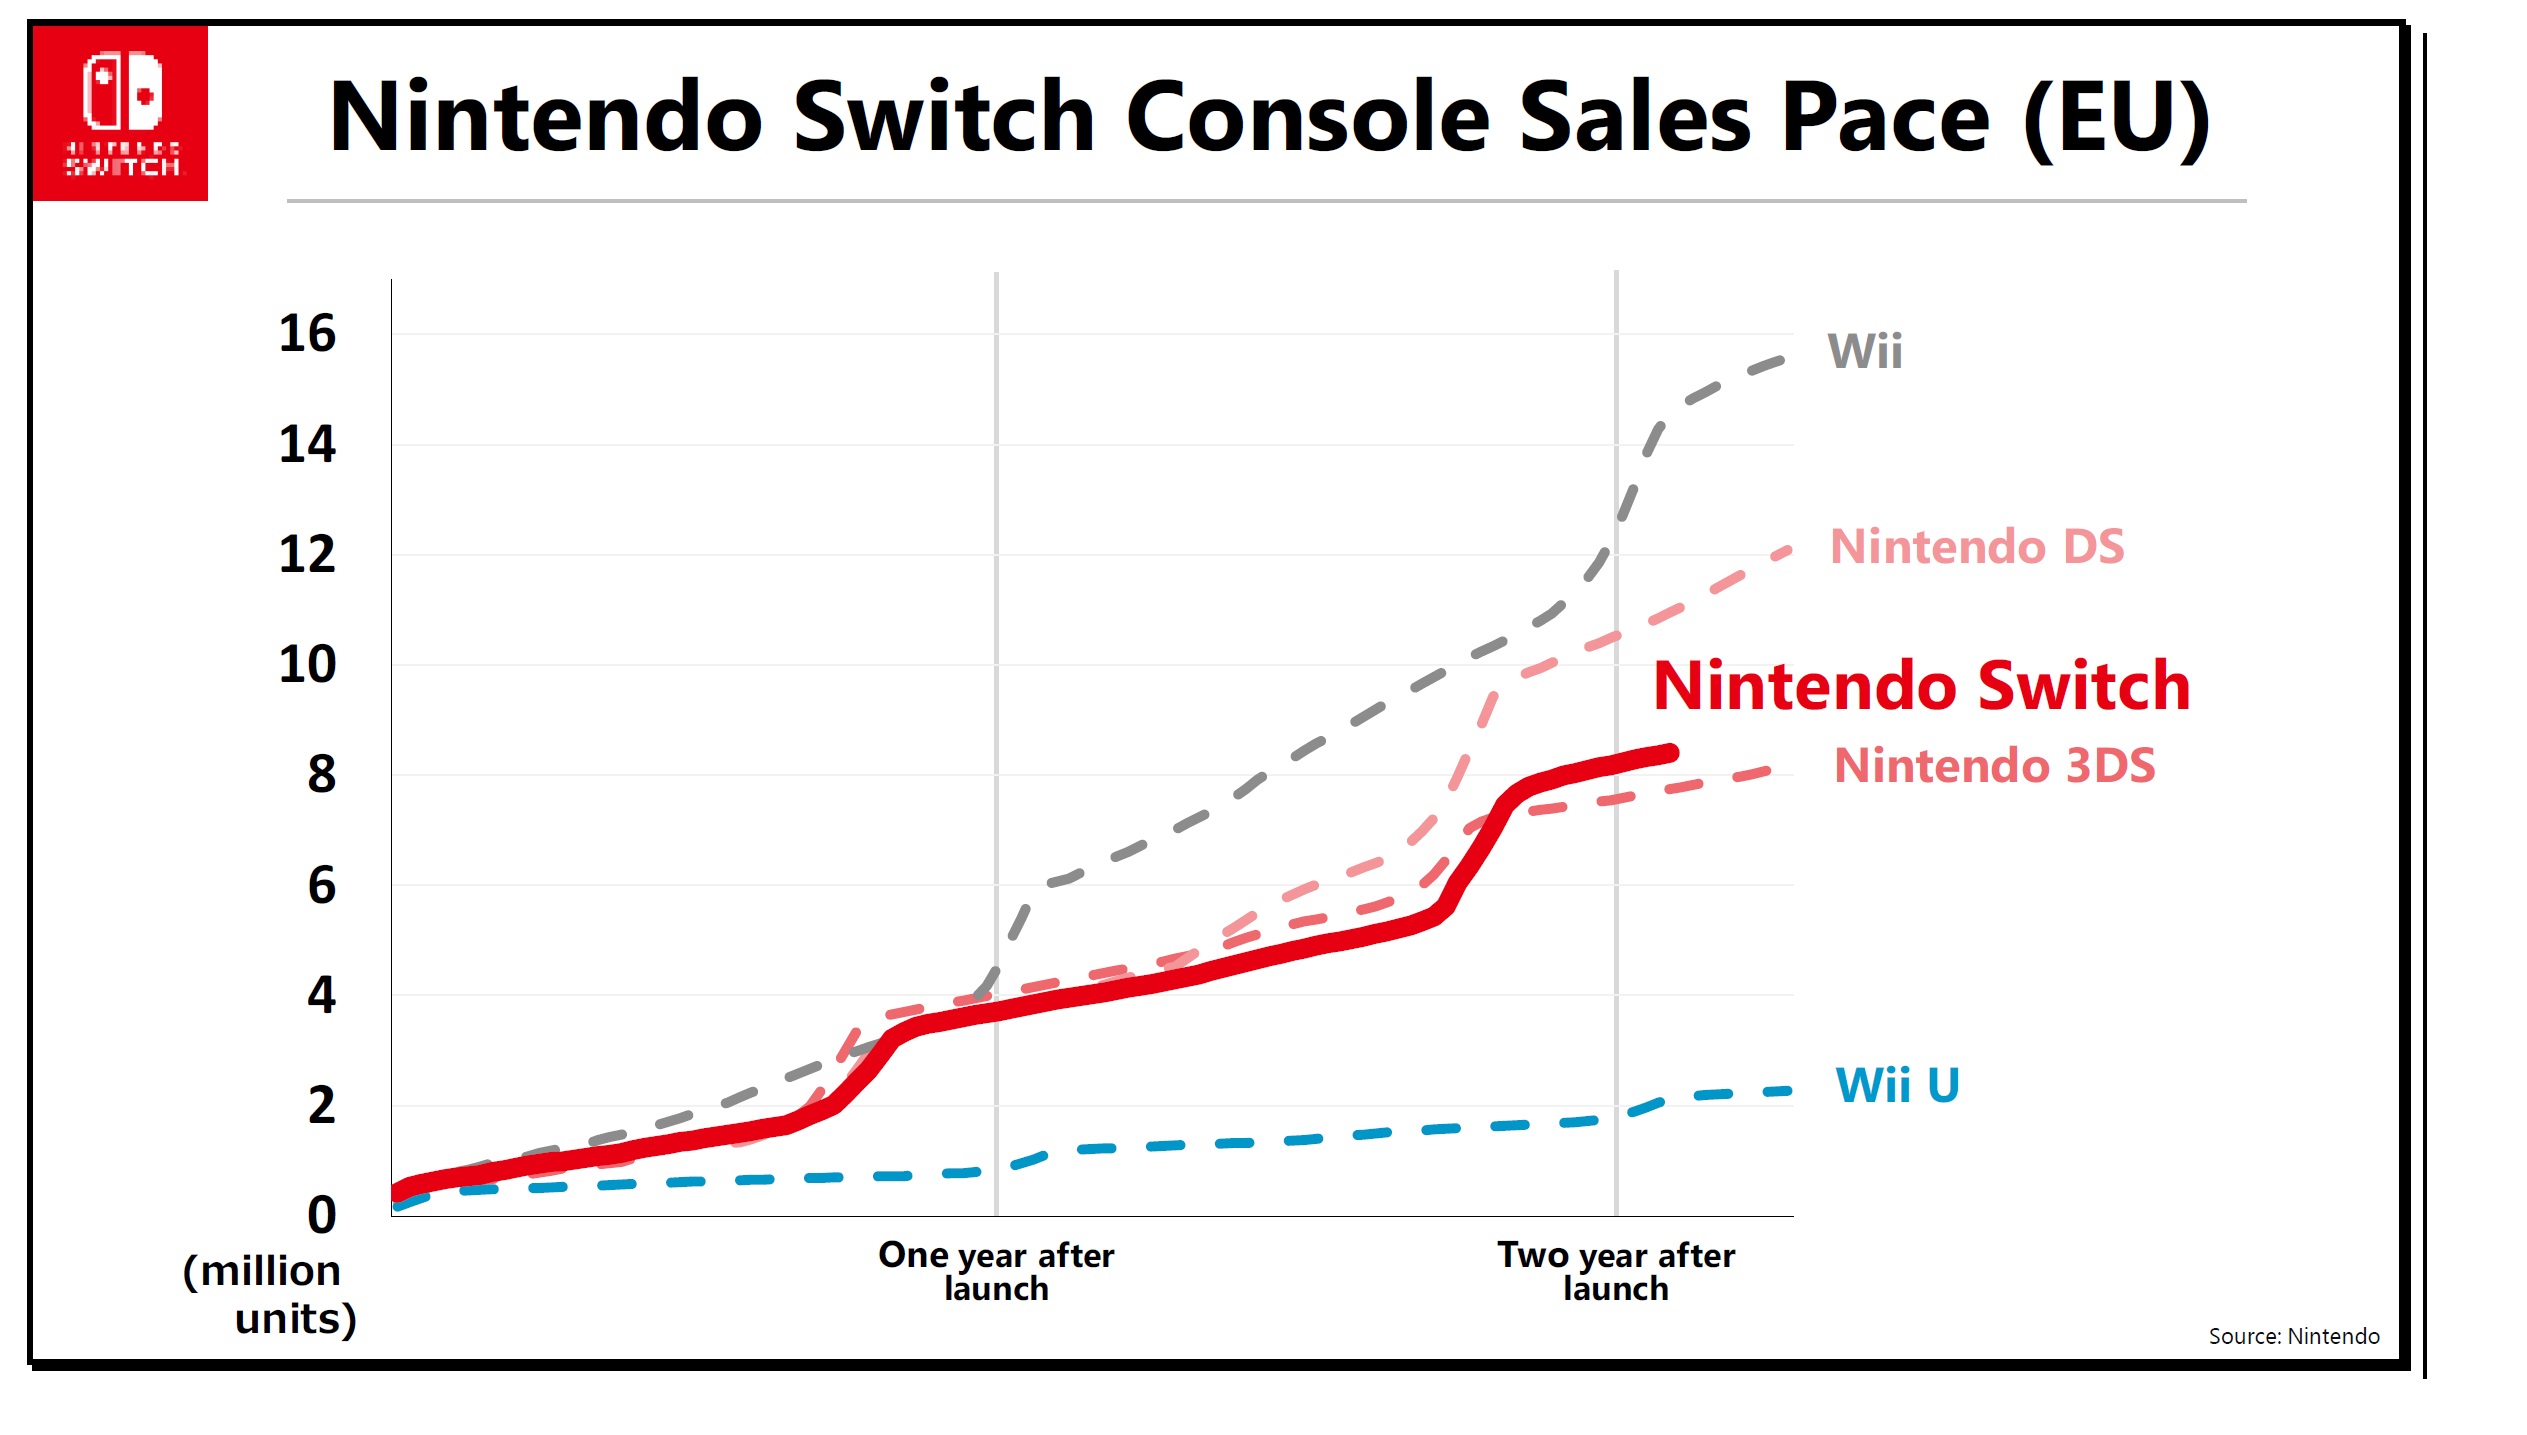 Nintendo on Switch momentum, hardware sales, sell-through trends